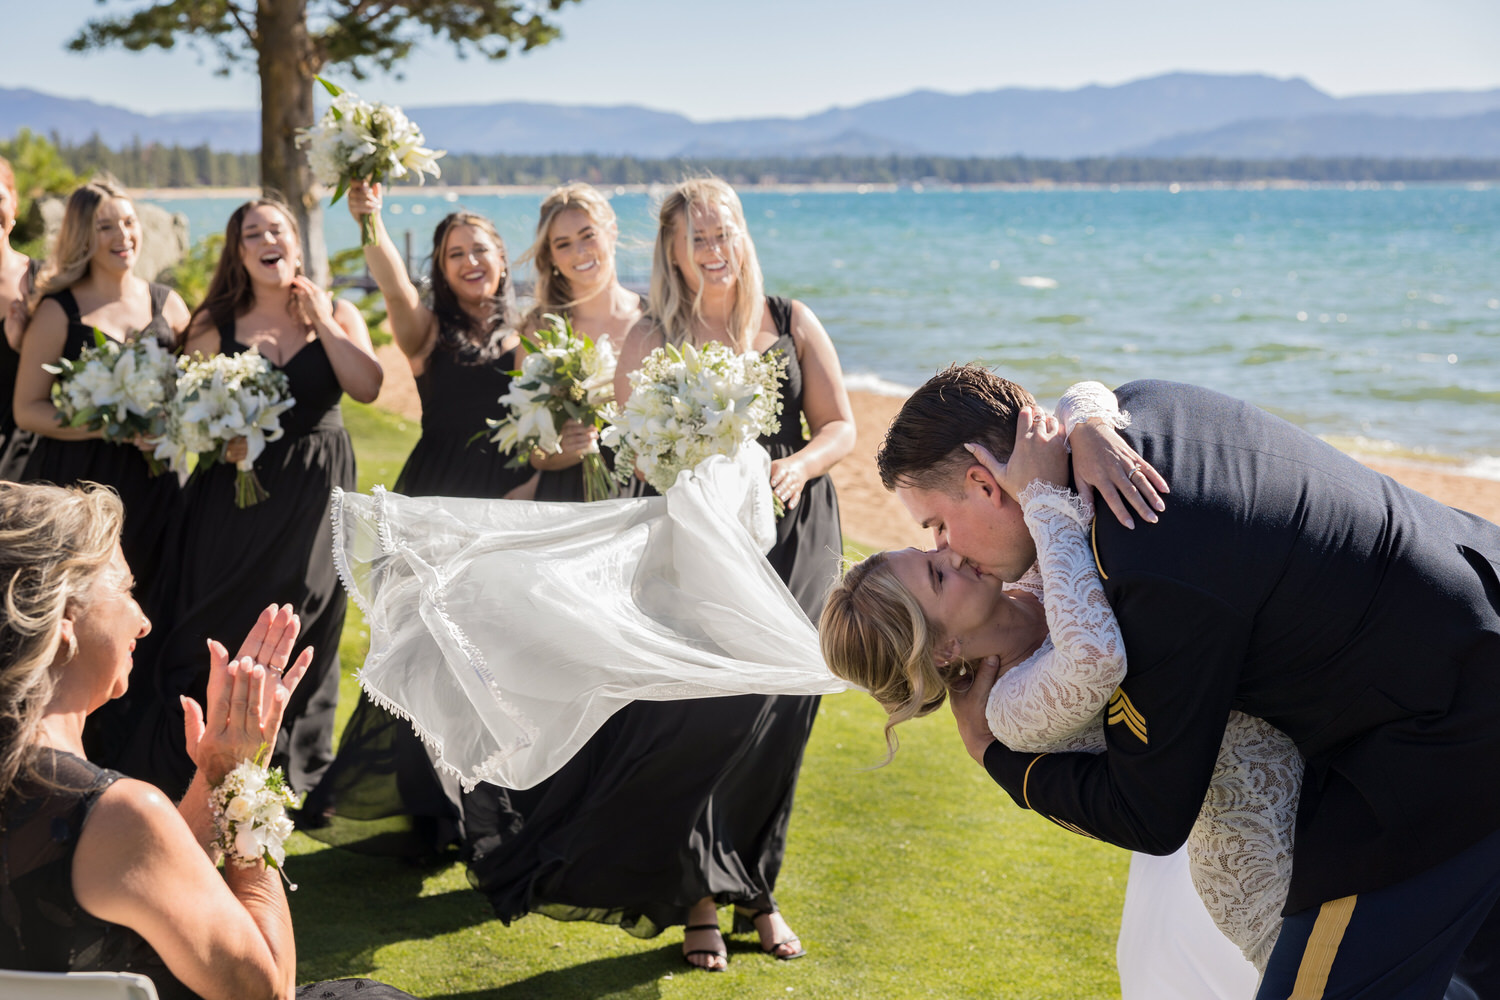 A romantic kiss on the North Lawn at an Edgewood Tahoe wedding ceremony.